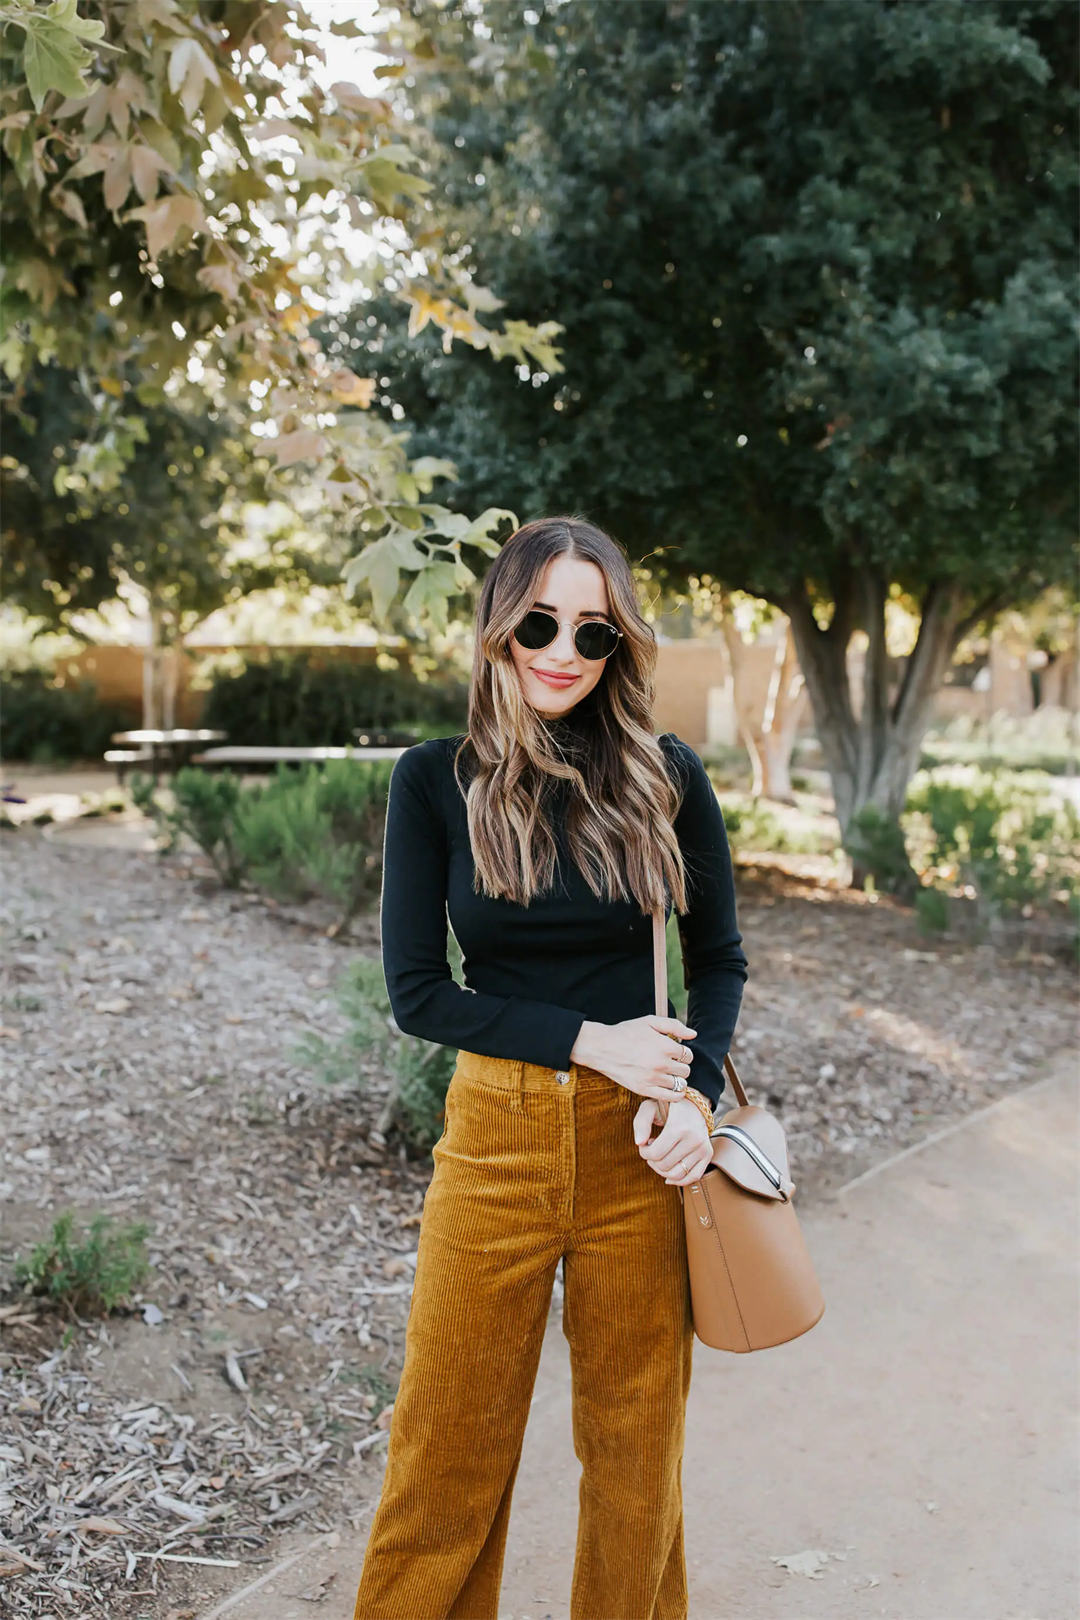 How to Style Brown Pants - 30 Outfit Ideas for Women with Brown